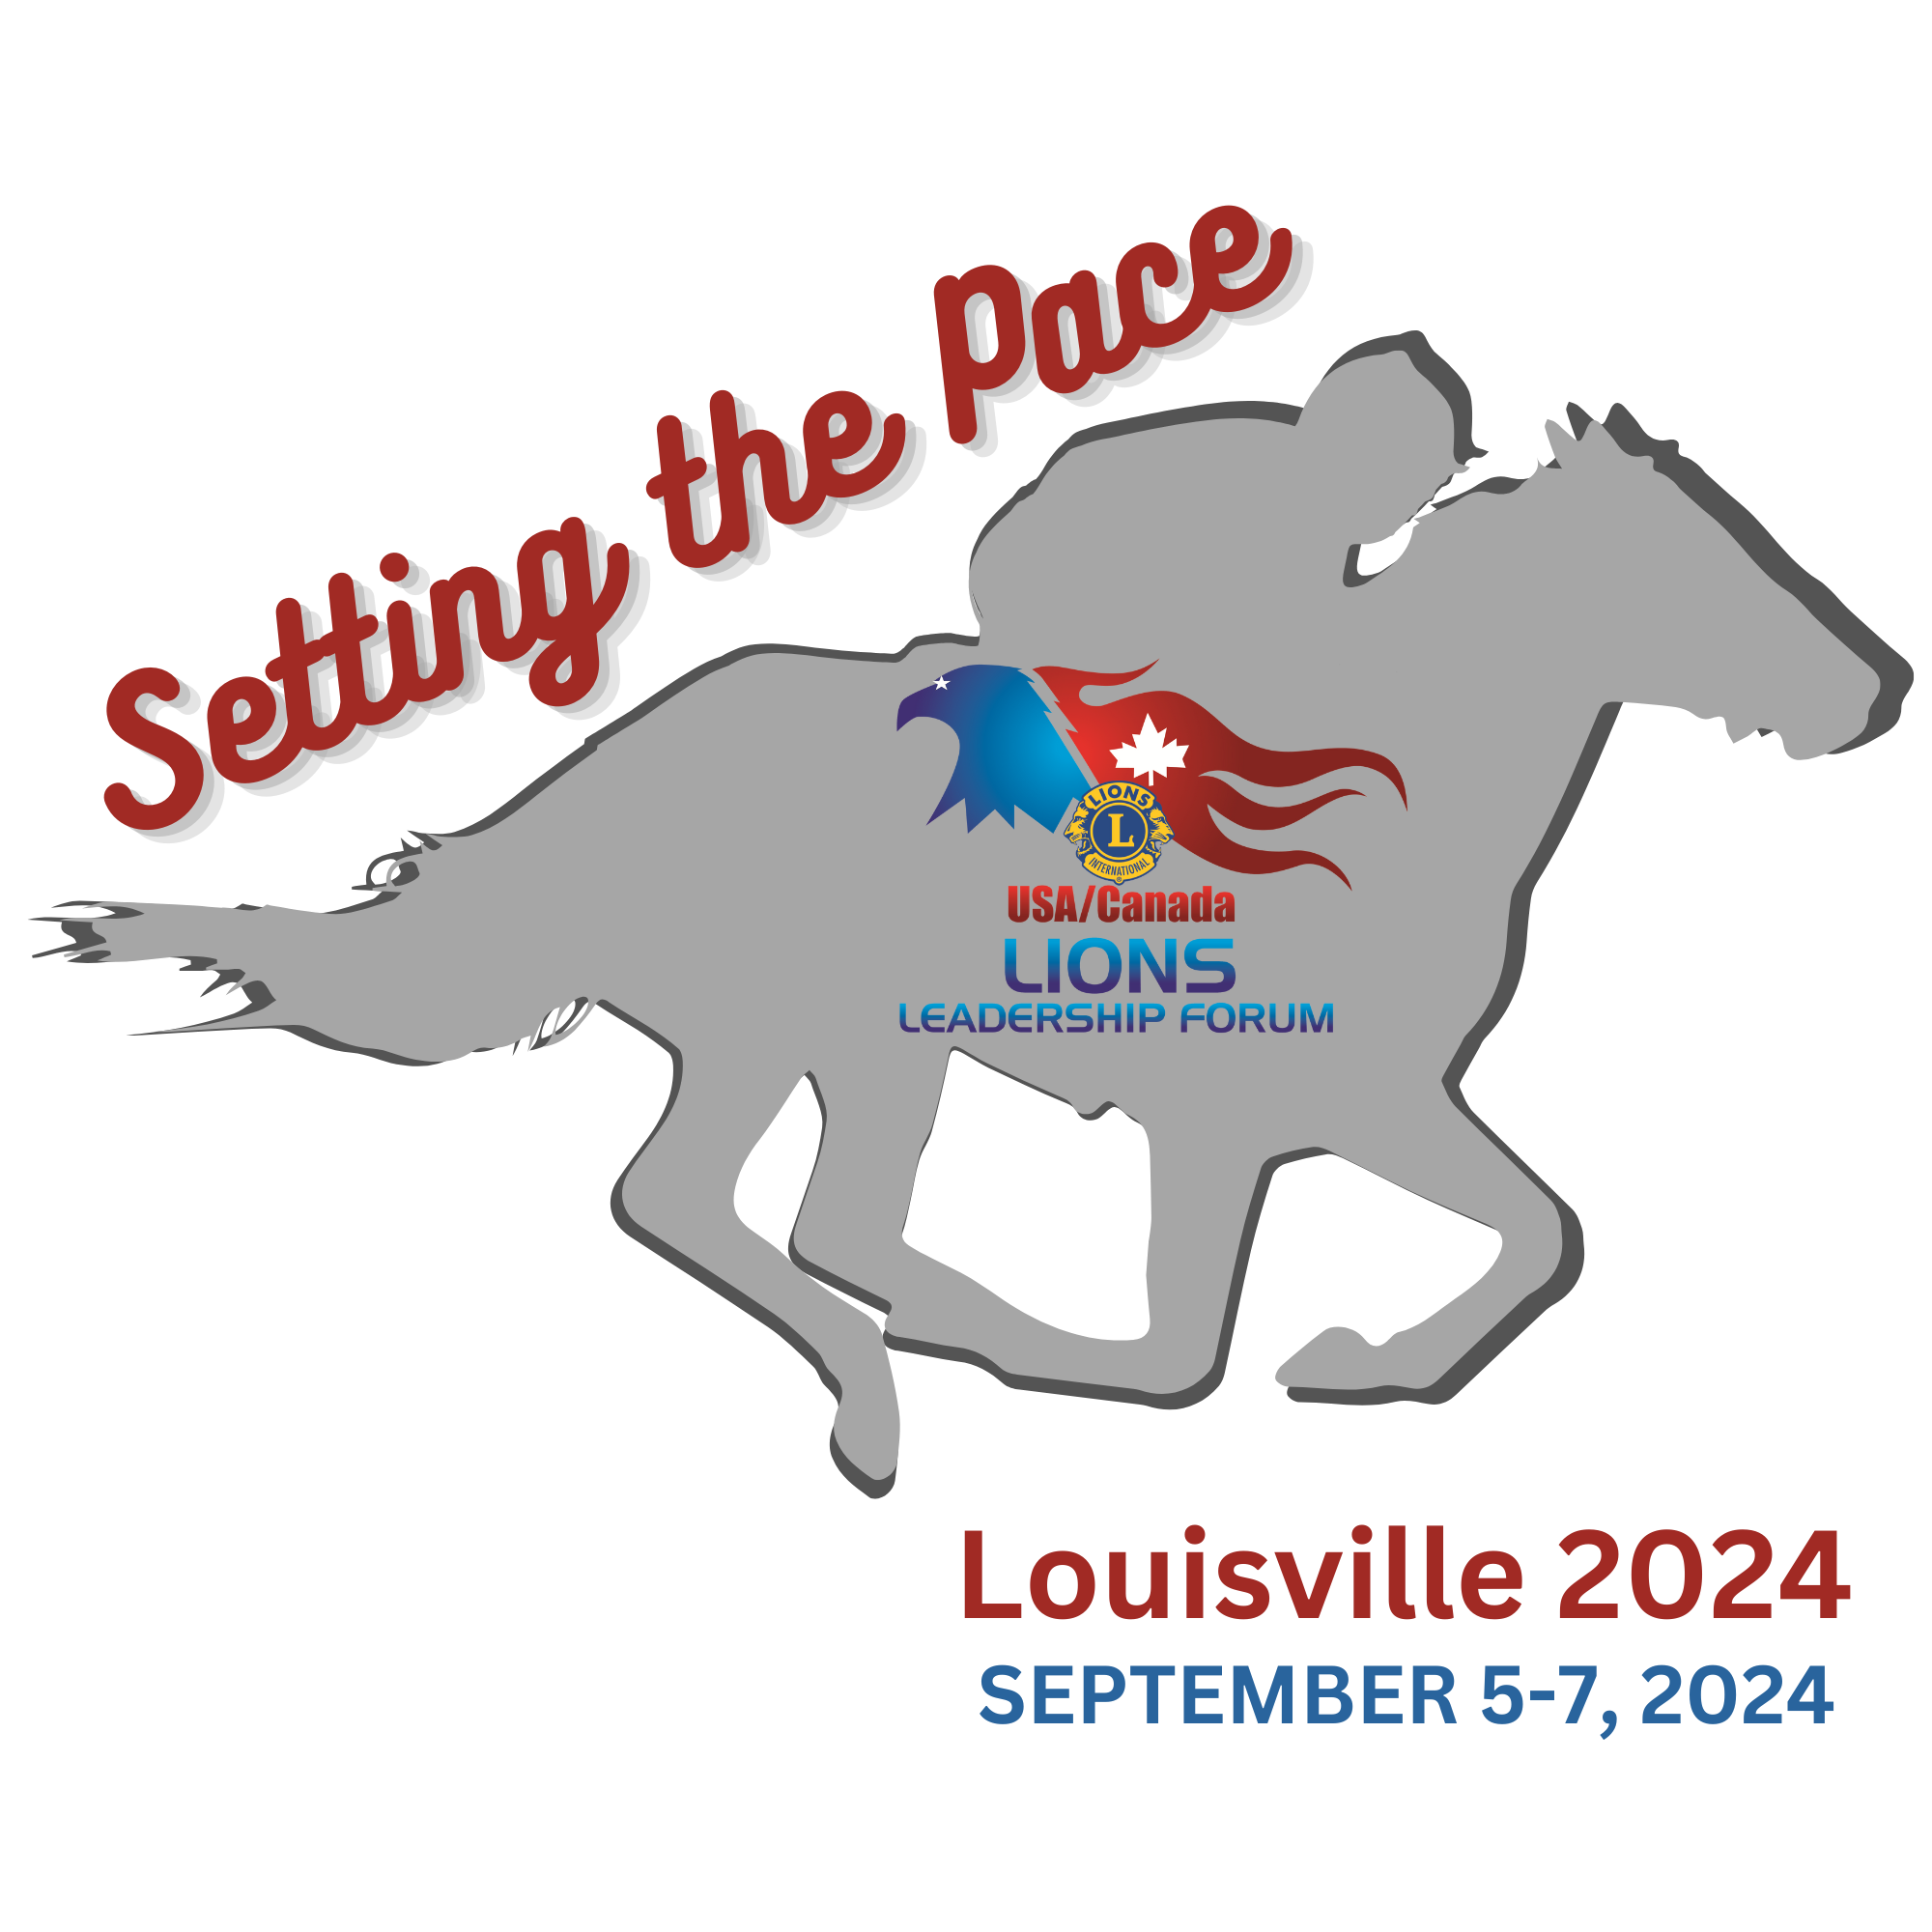 Setting the Pace at the USA/Canada Lions Leadership Forum in Louisville September 5-7 2024